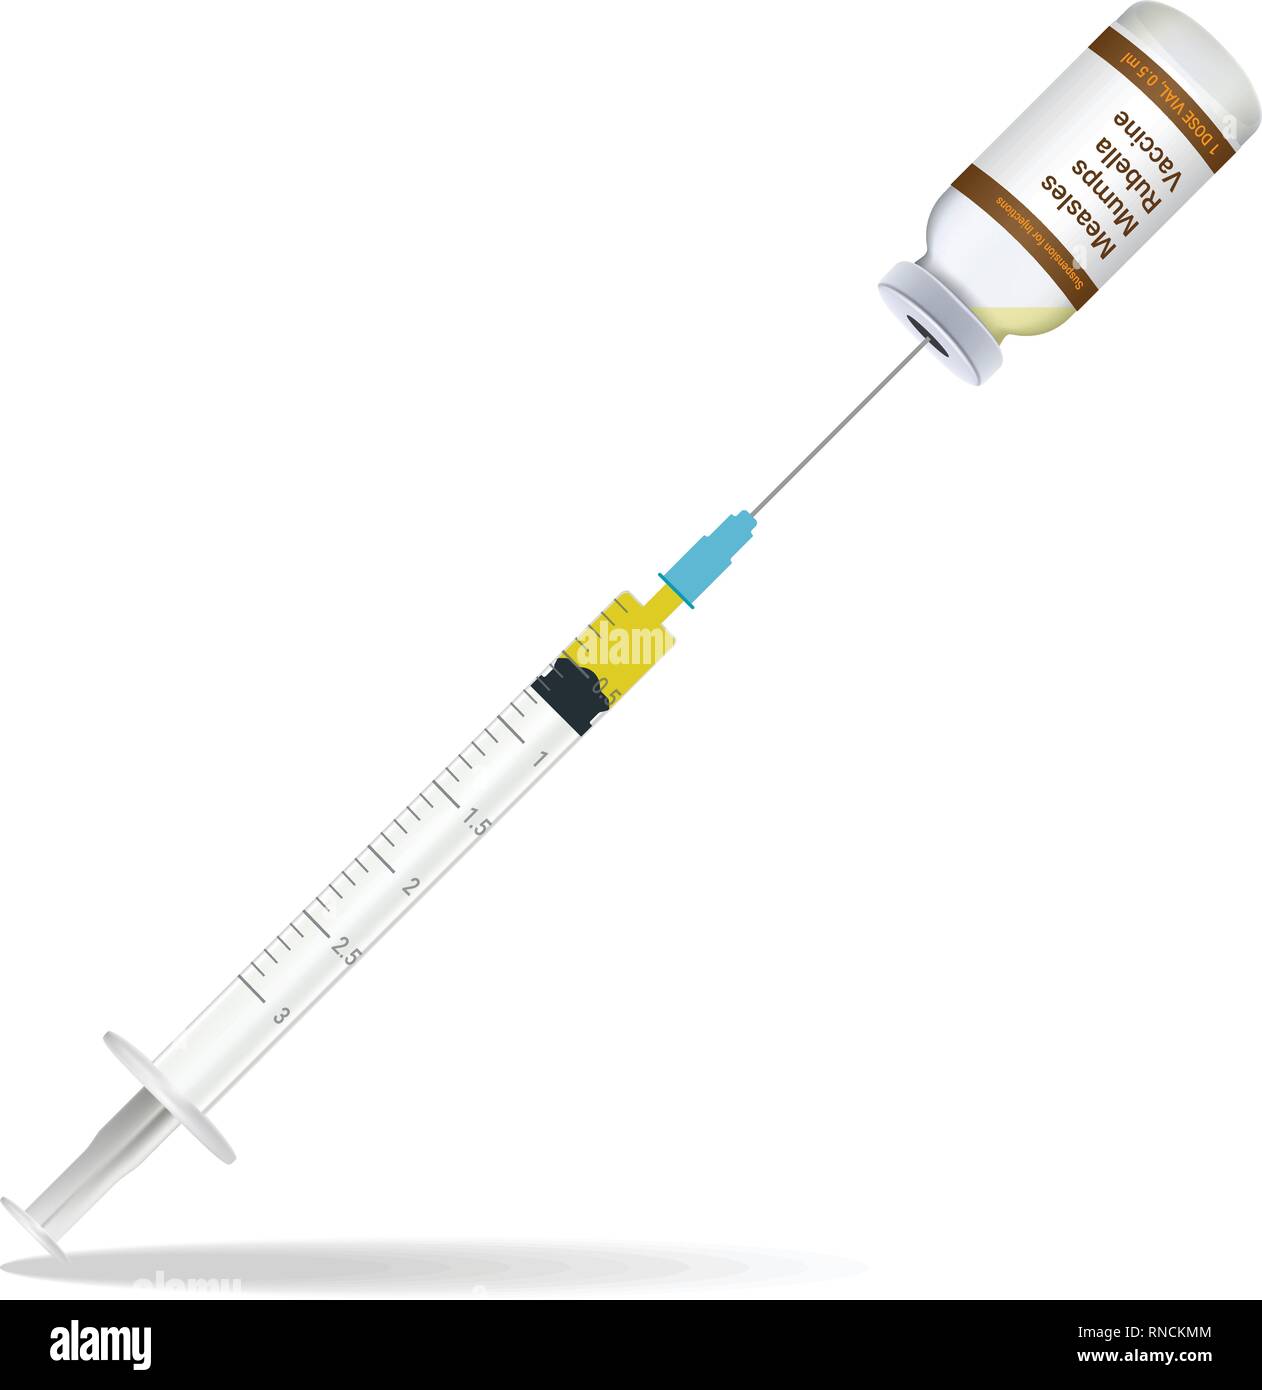 Immunization, Measles Mumps Rubella Vaccine Syringe Contain Some Injection And Injection Bottle Isolated On A White Background. Vector Illustration. Stock Vector